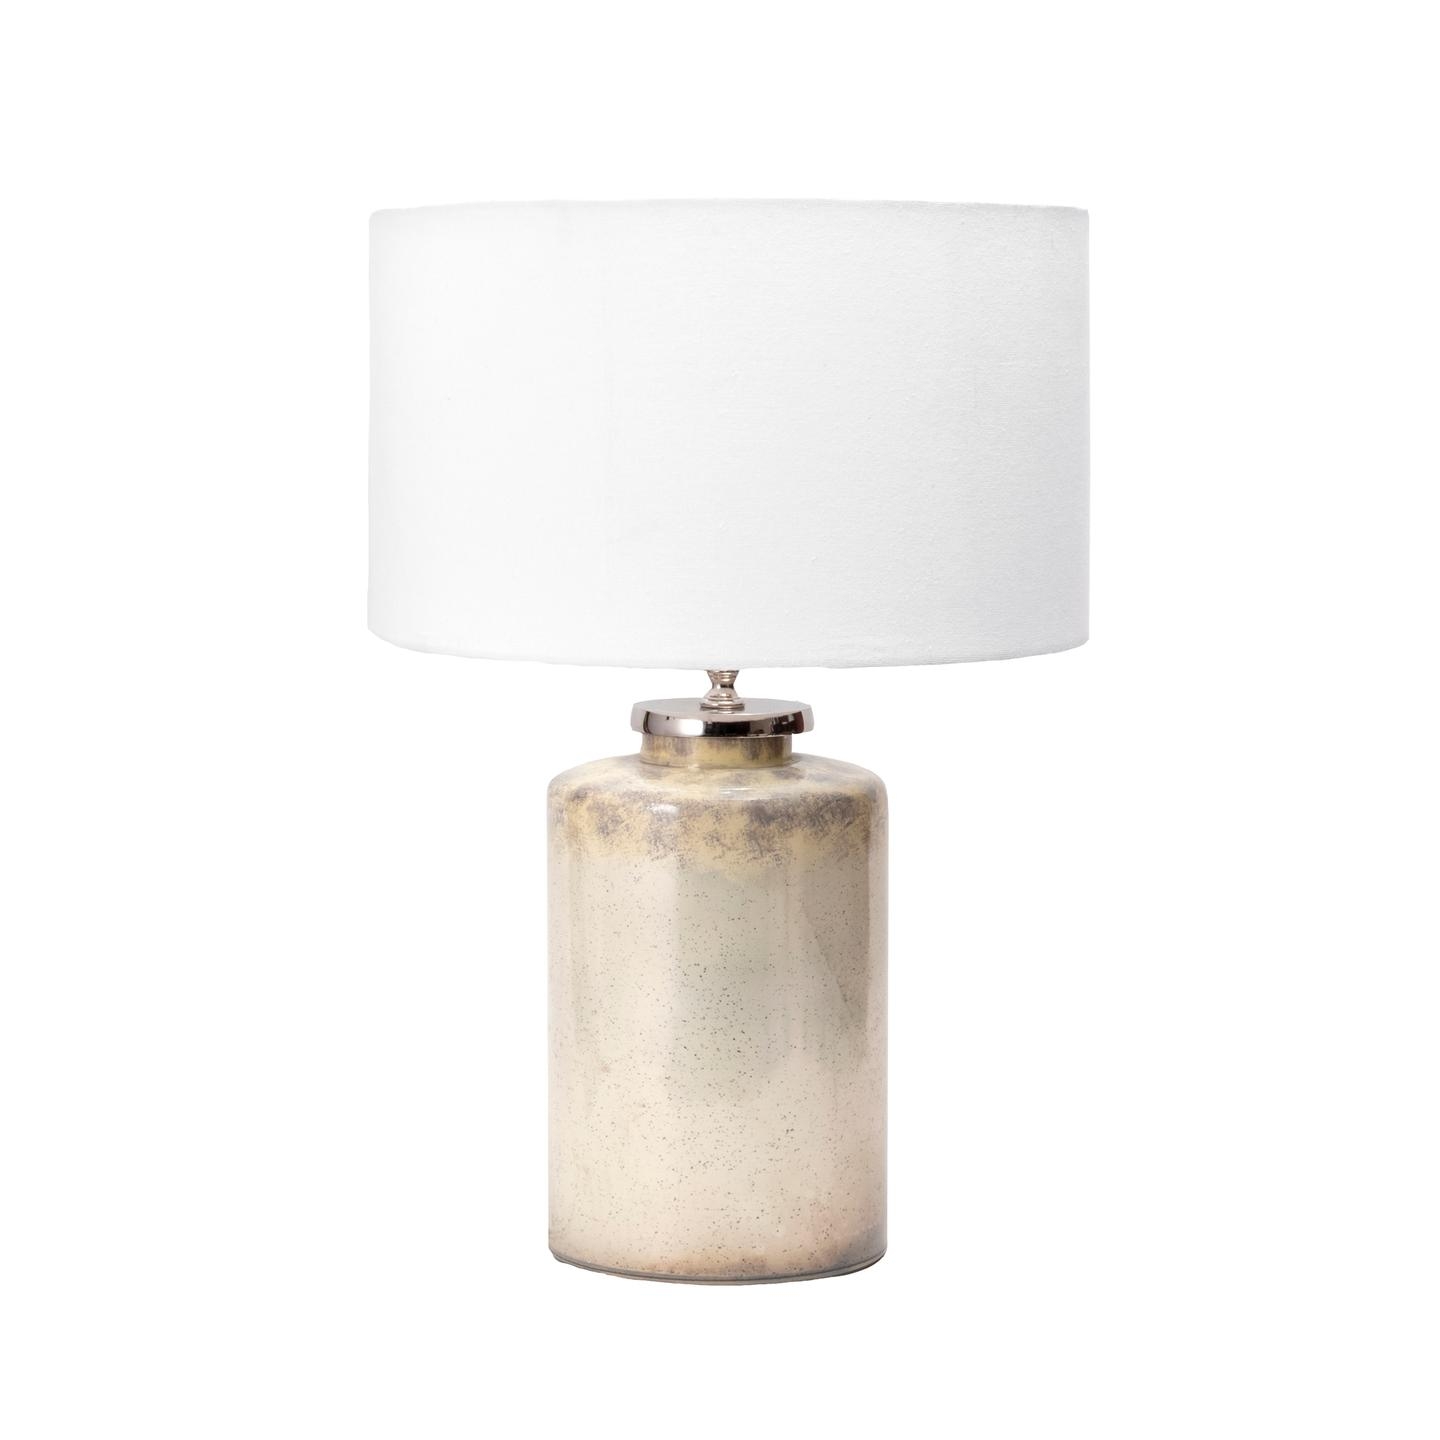 Sitka 21" Glass Table Lamp - Image 2